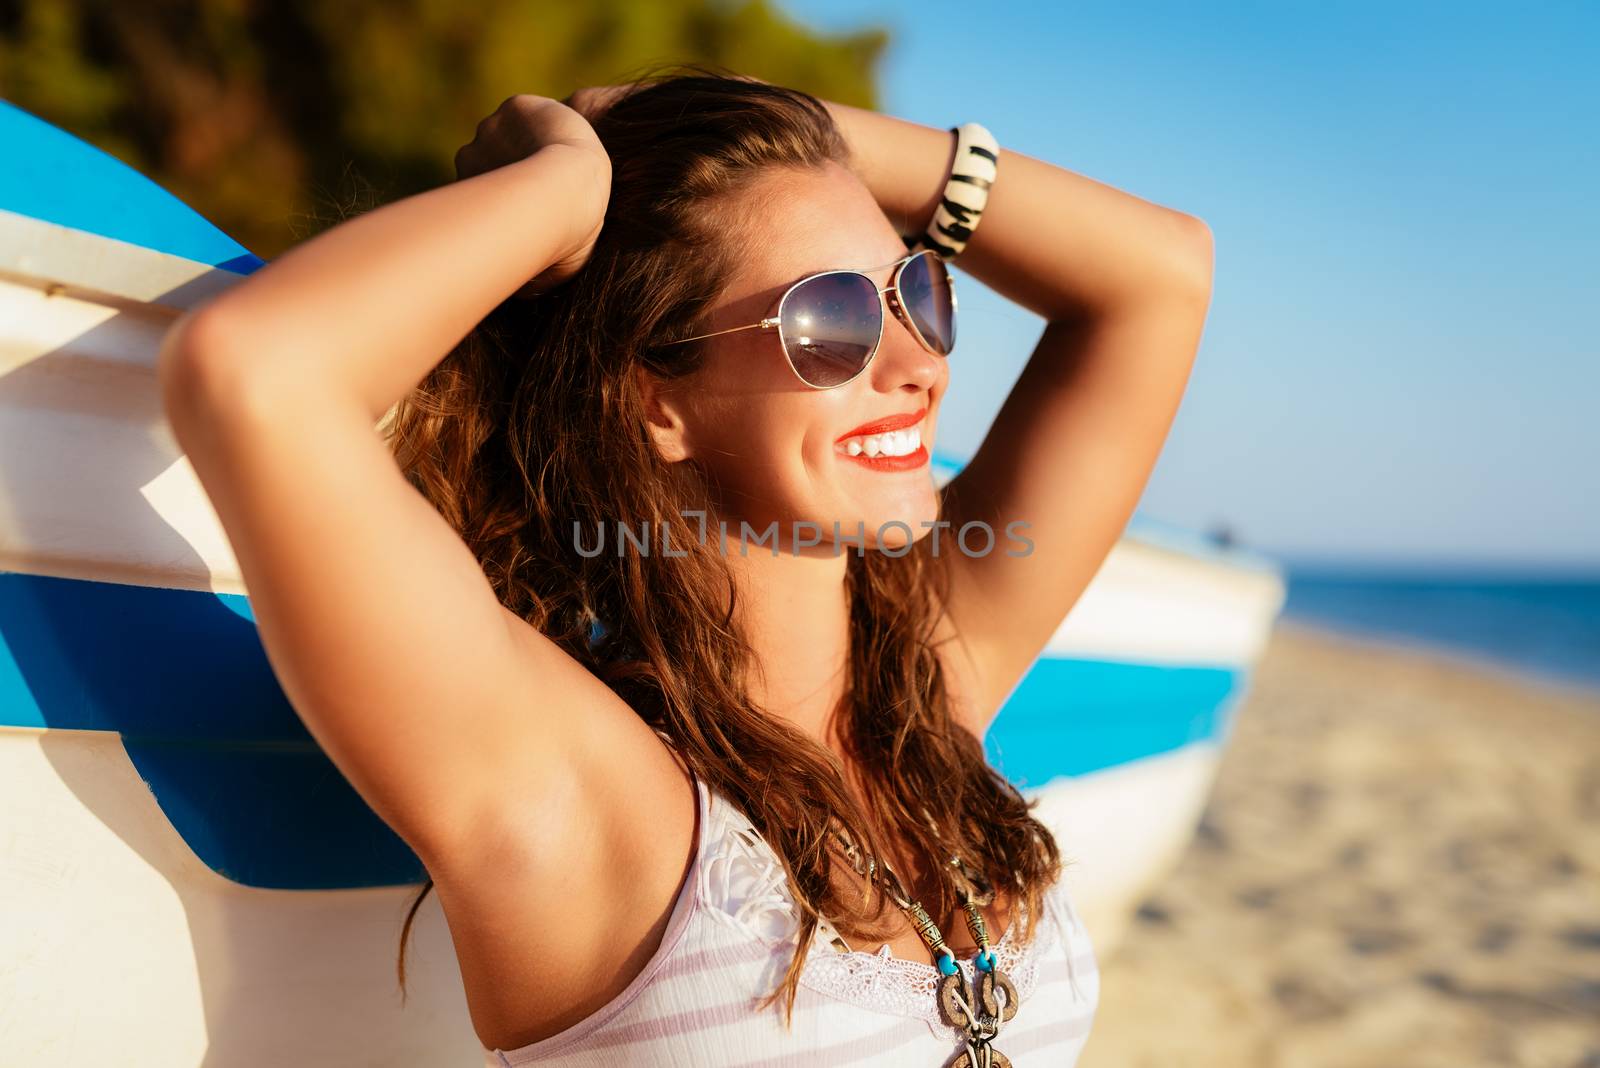 Beautiful young woman relaxing on the beach. She is sitting next to boat and enjoying at sunbathing.